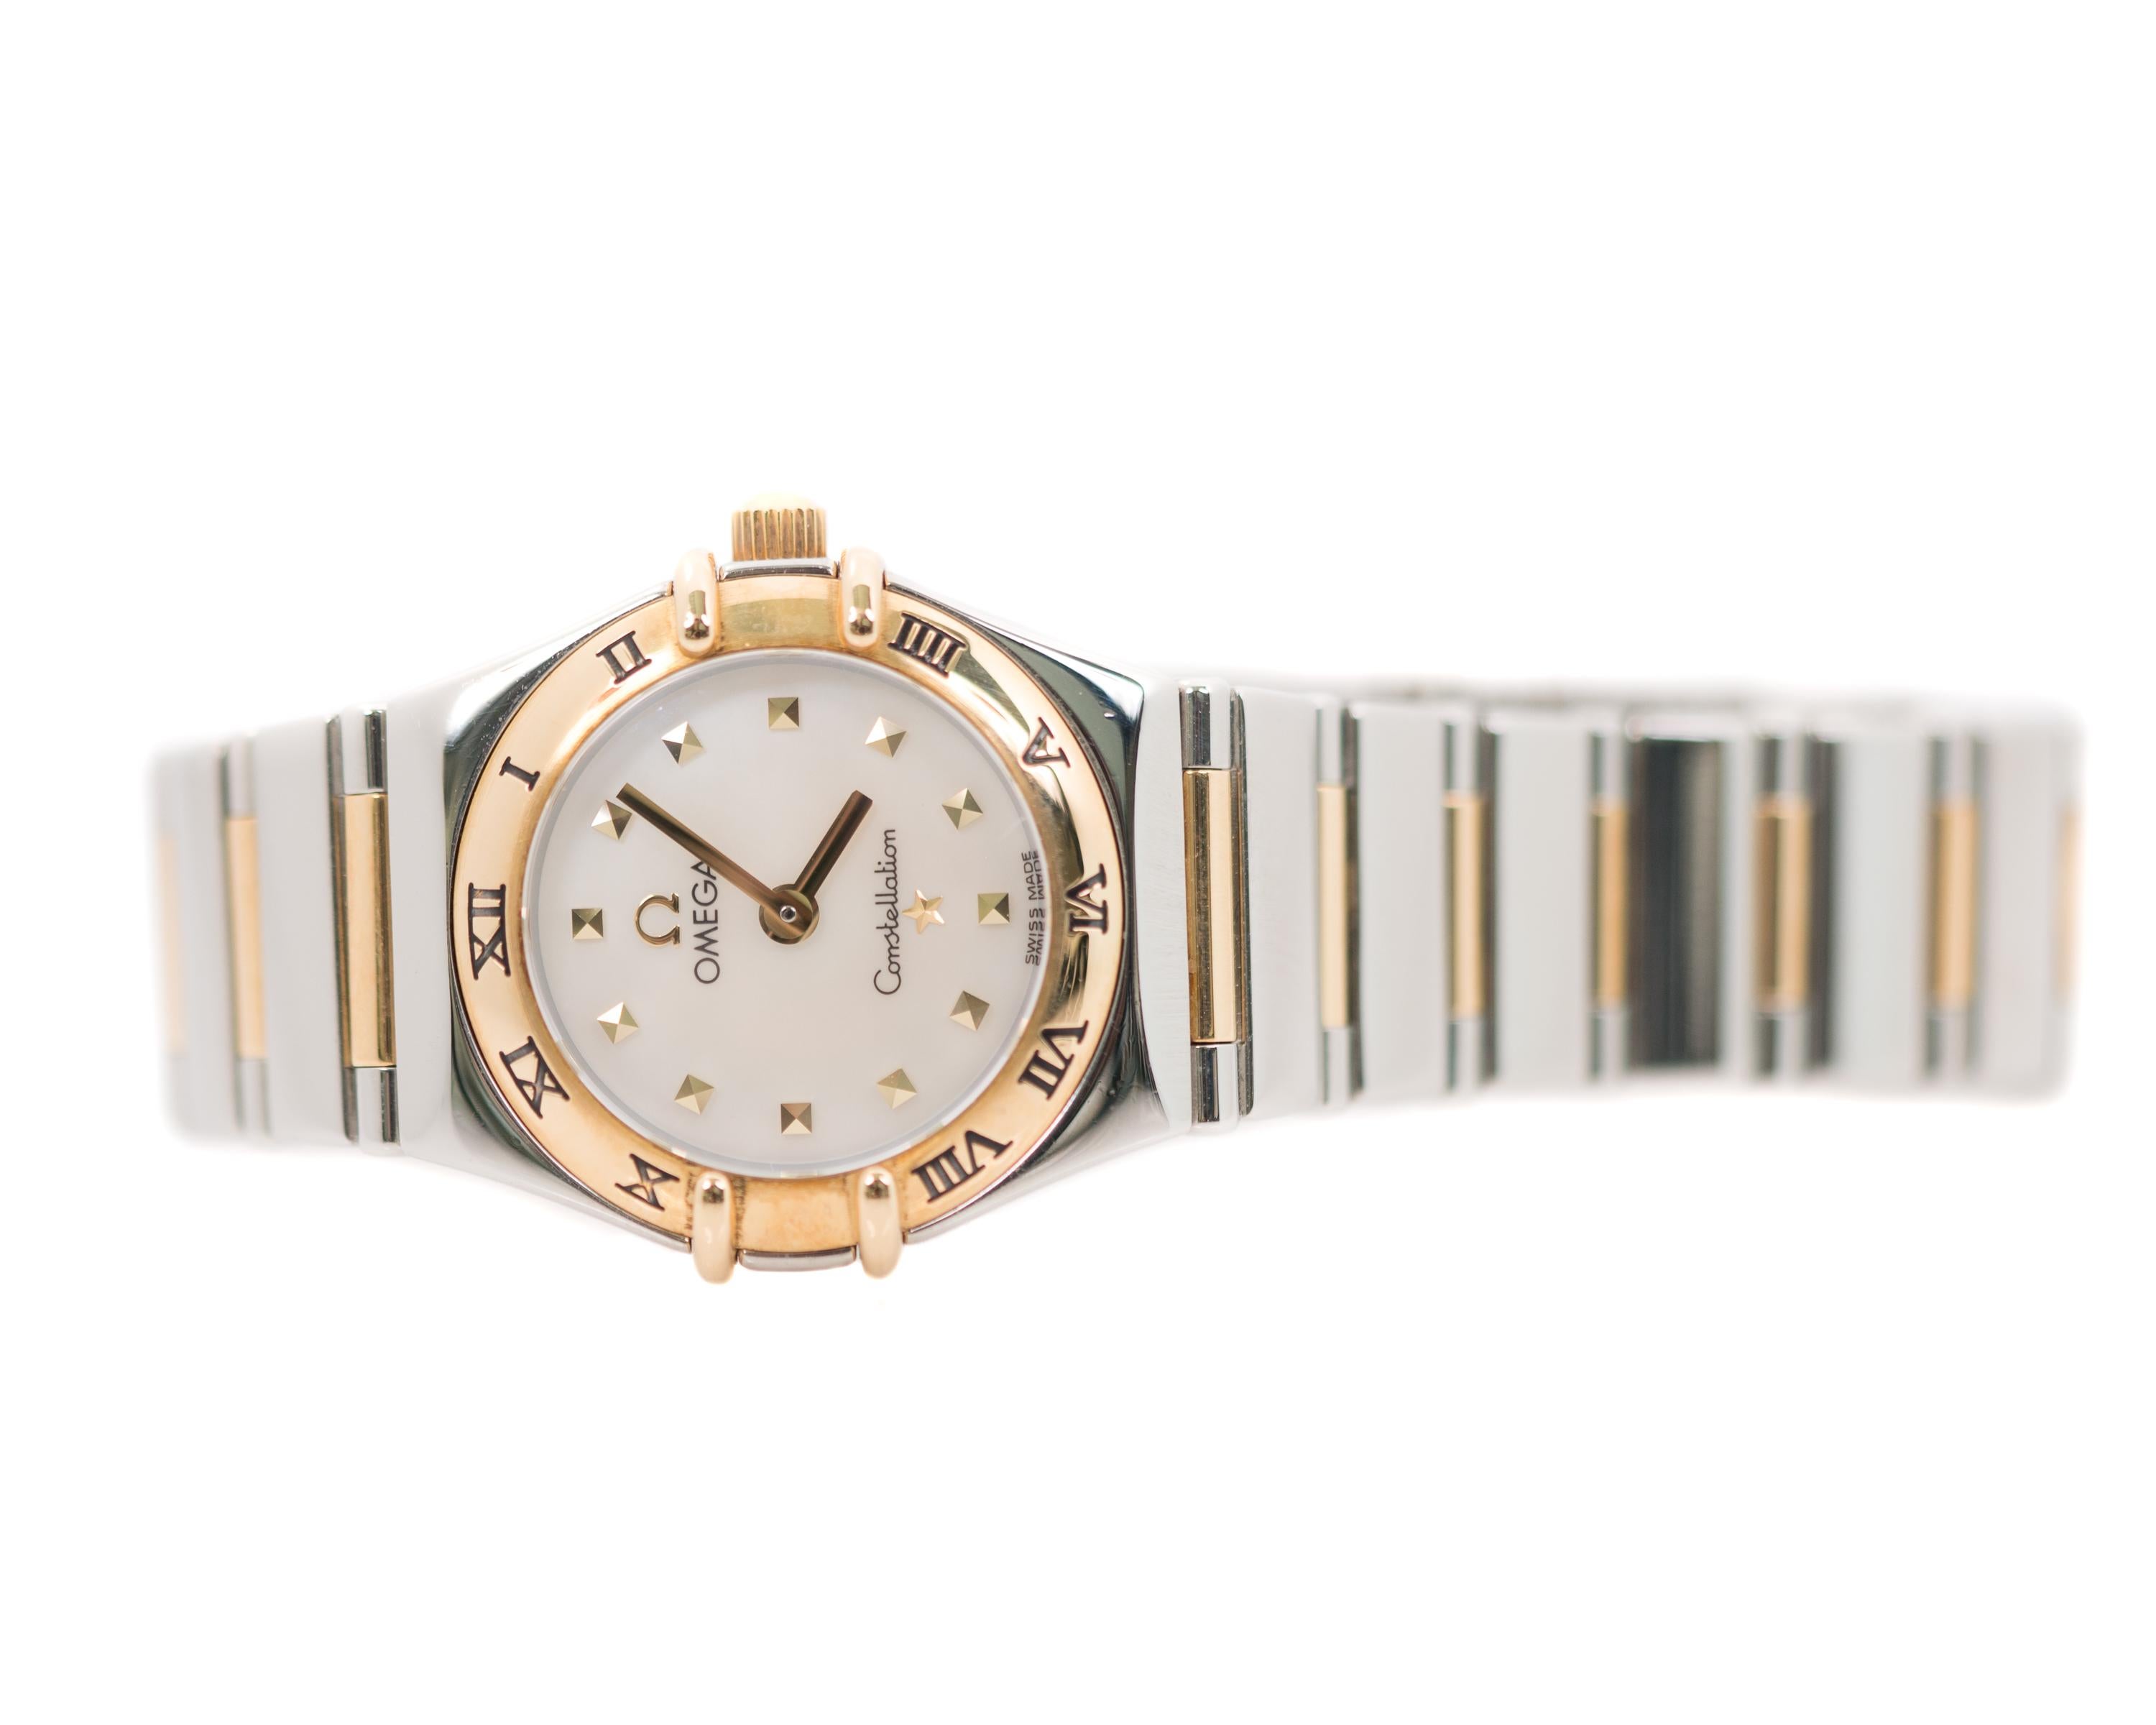 Omega Constellation Ladies Wrist Watch - 21 Karat Yellow Gold, Stainless Steel

Features:
Case diameter: 23 millimeters without crown, 25 millimeters with crown
Stainless Steel Case 
21 Karat Yellow Gold Bezel and Crown
Black Roman Numeral Hour